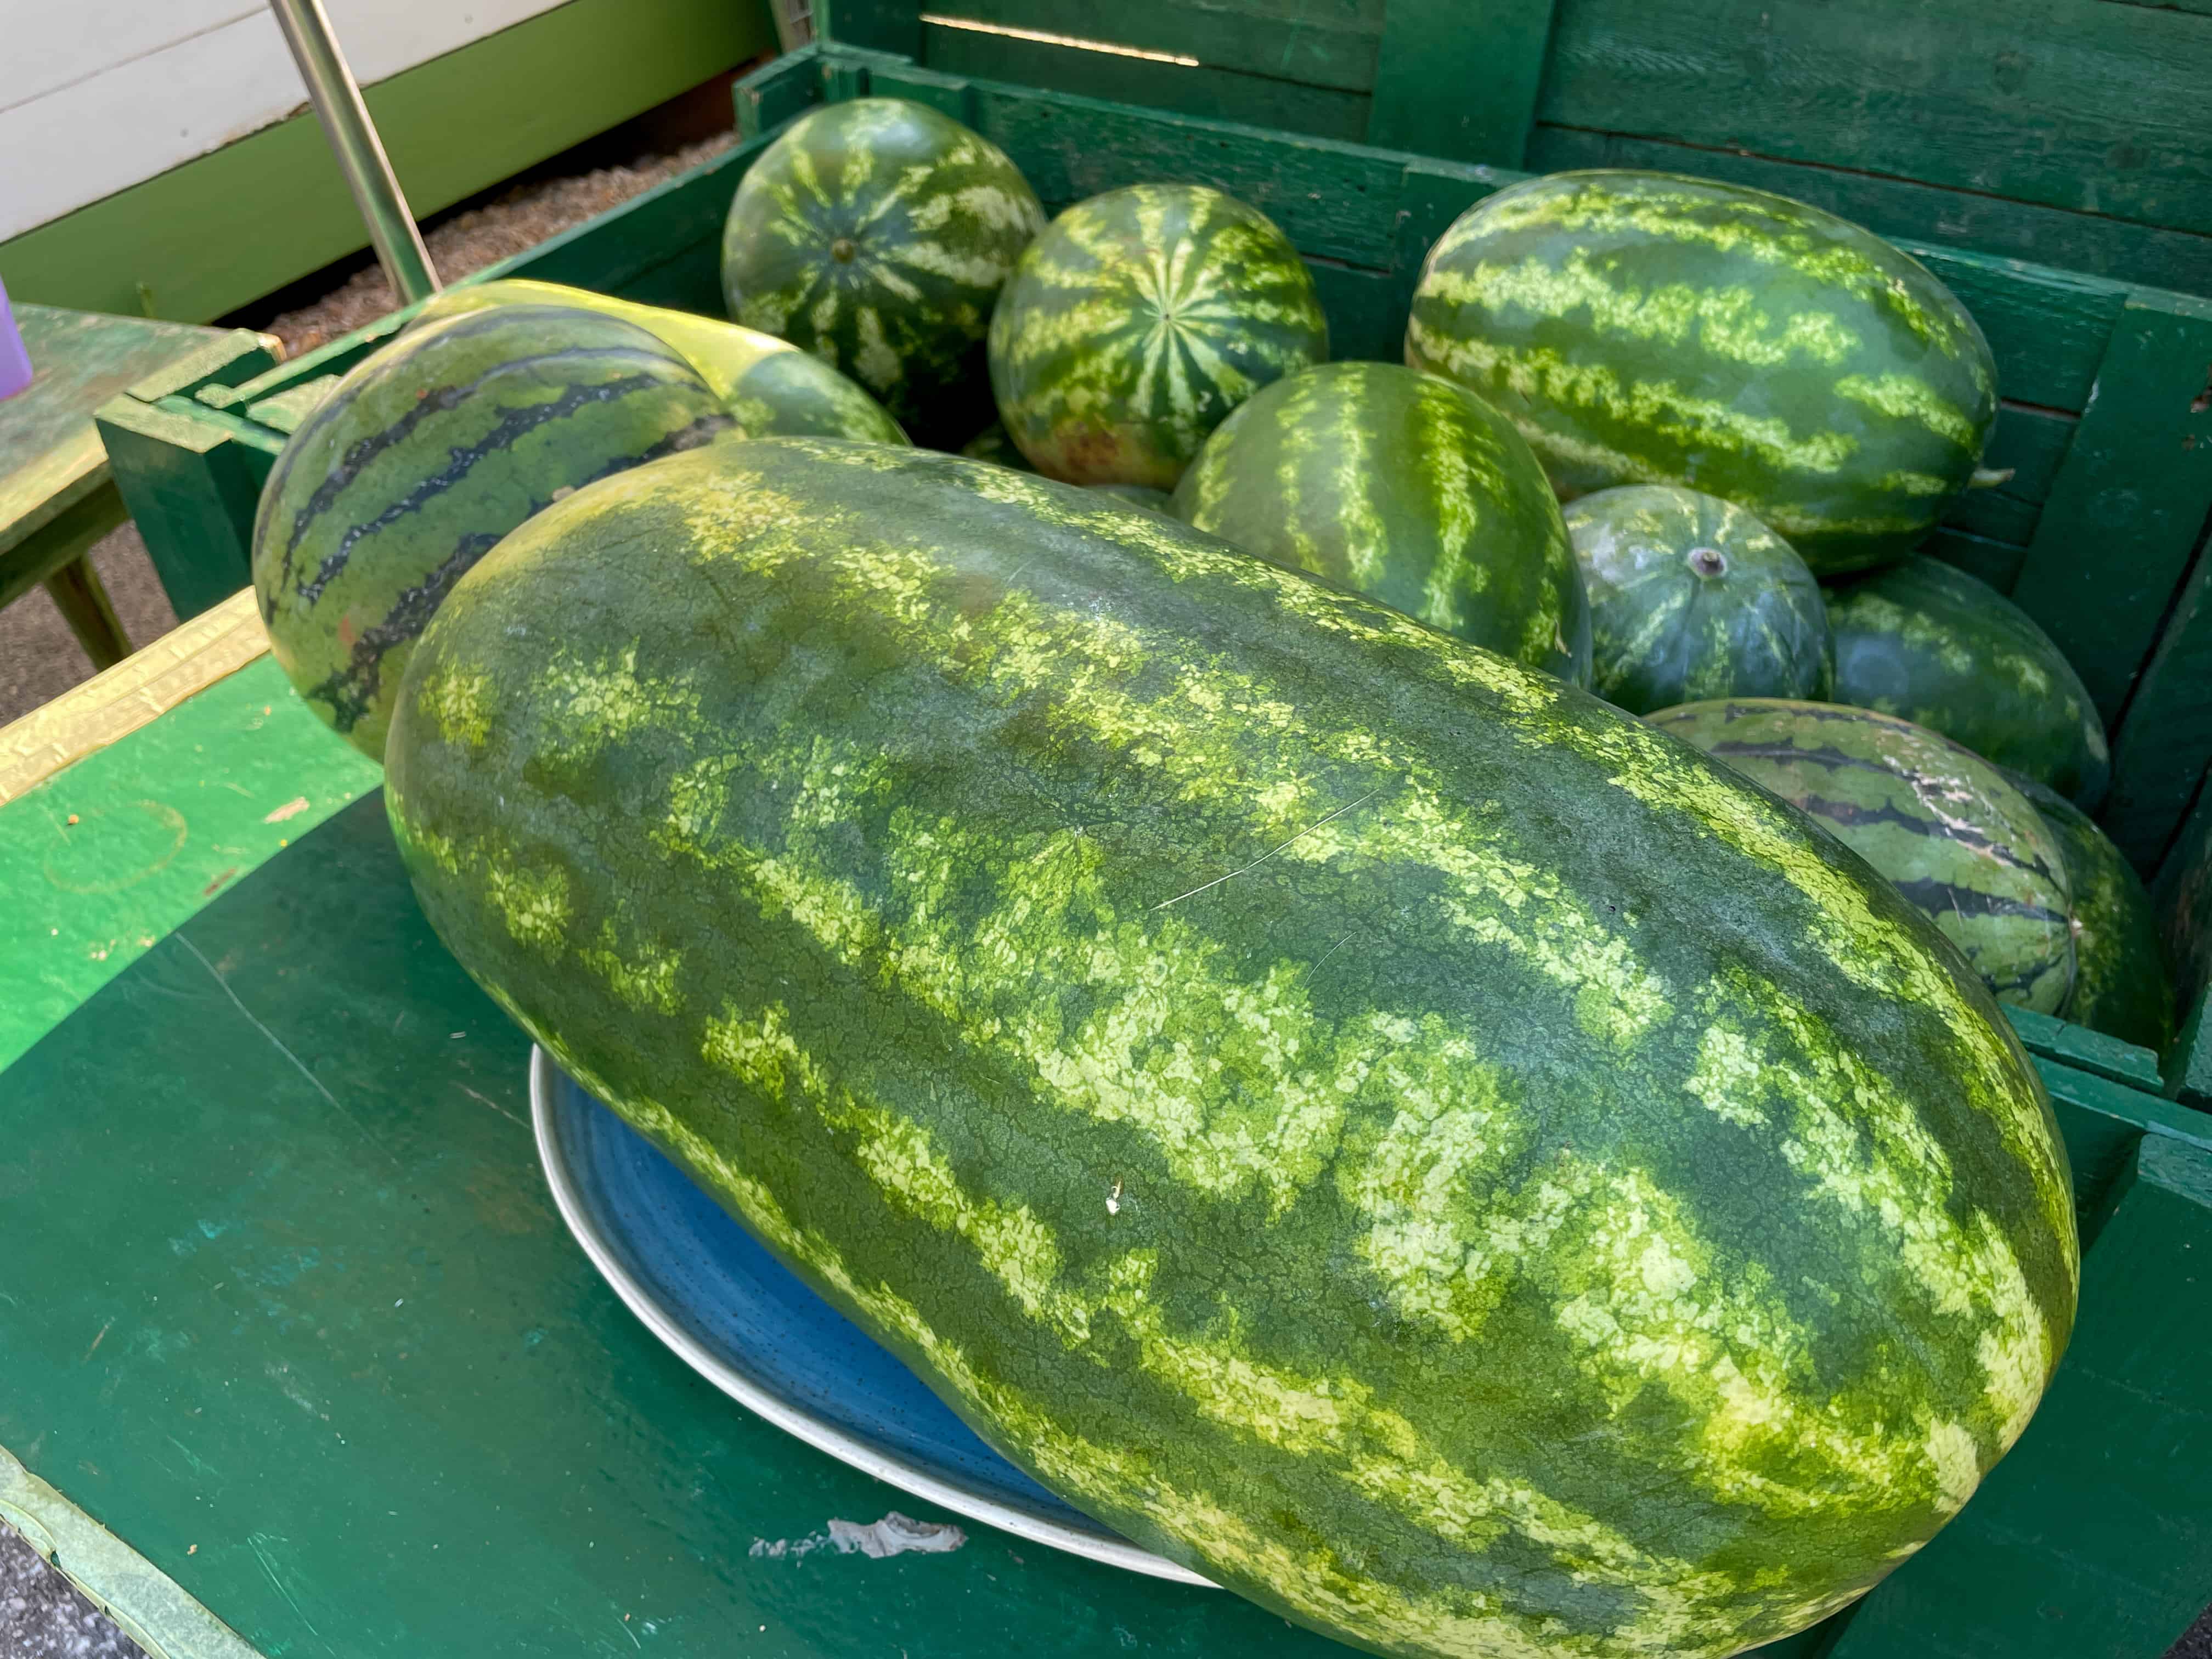 Only big melons